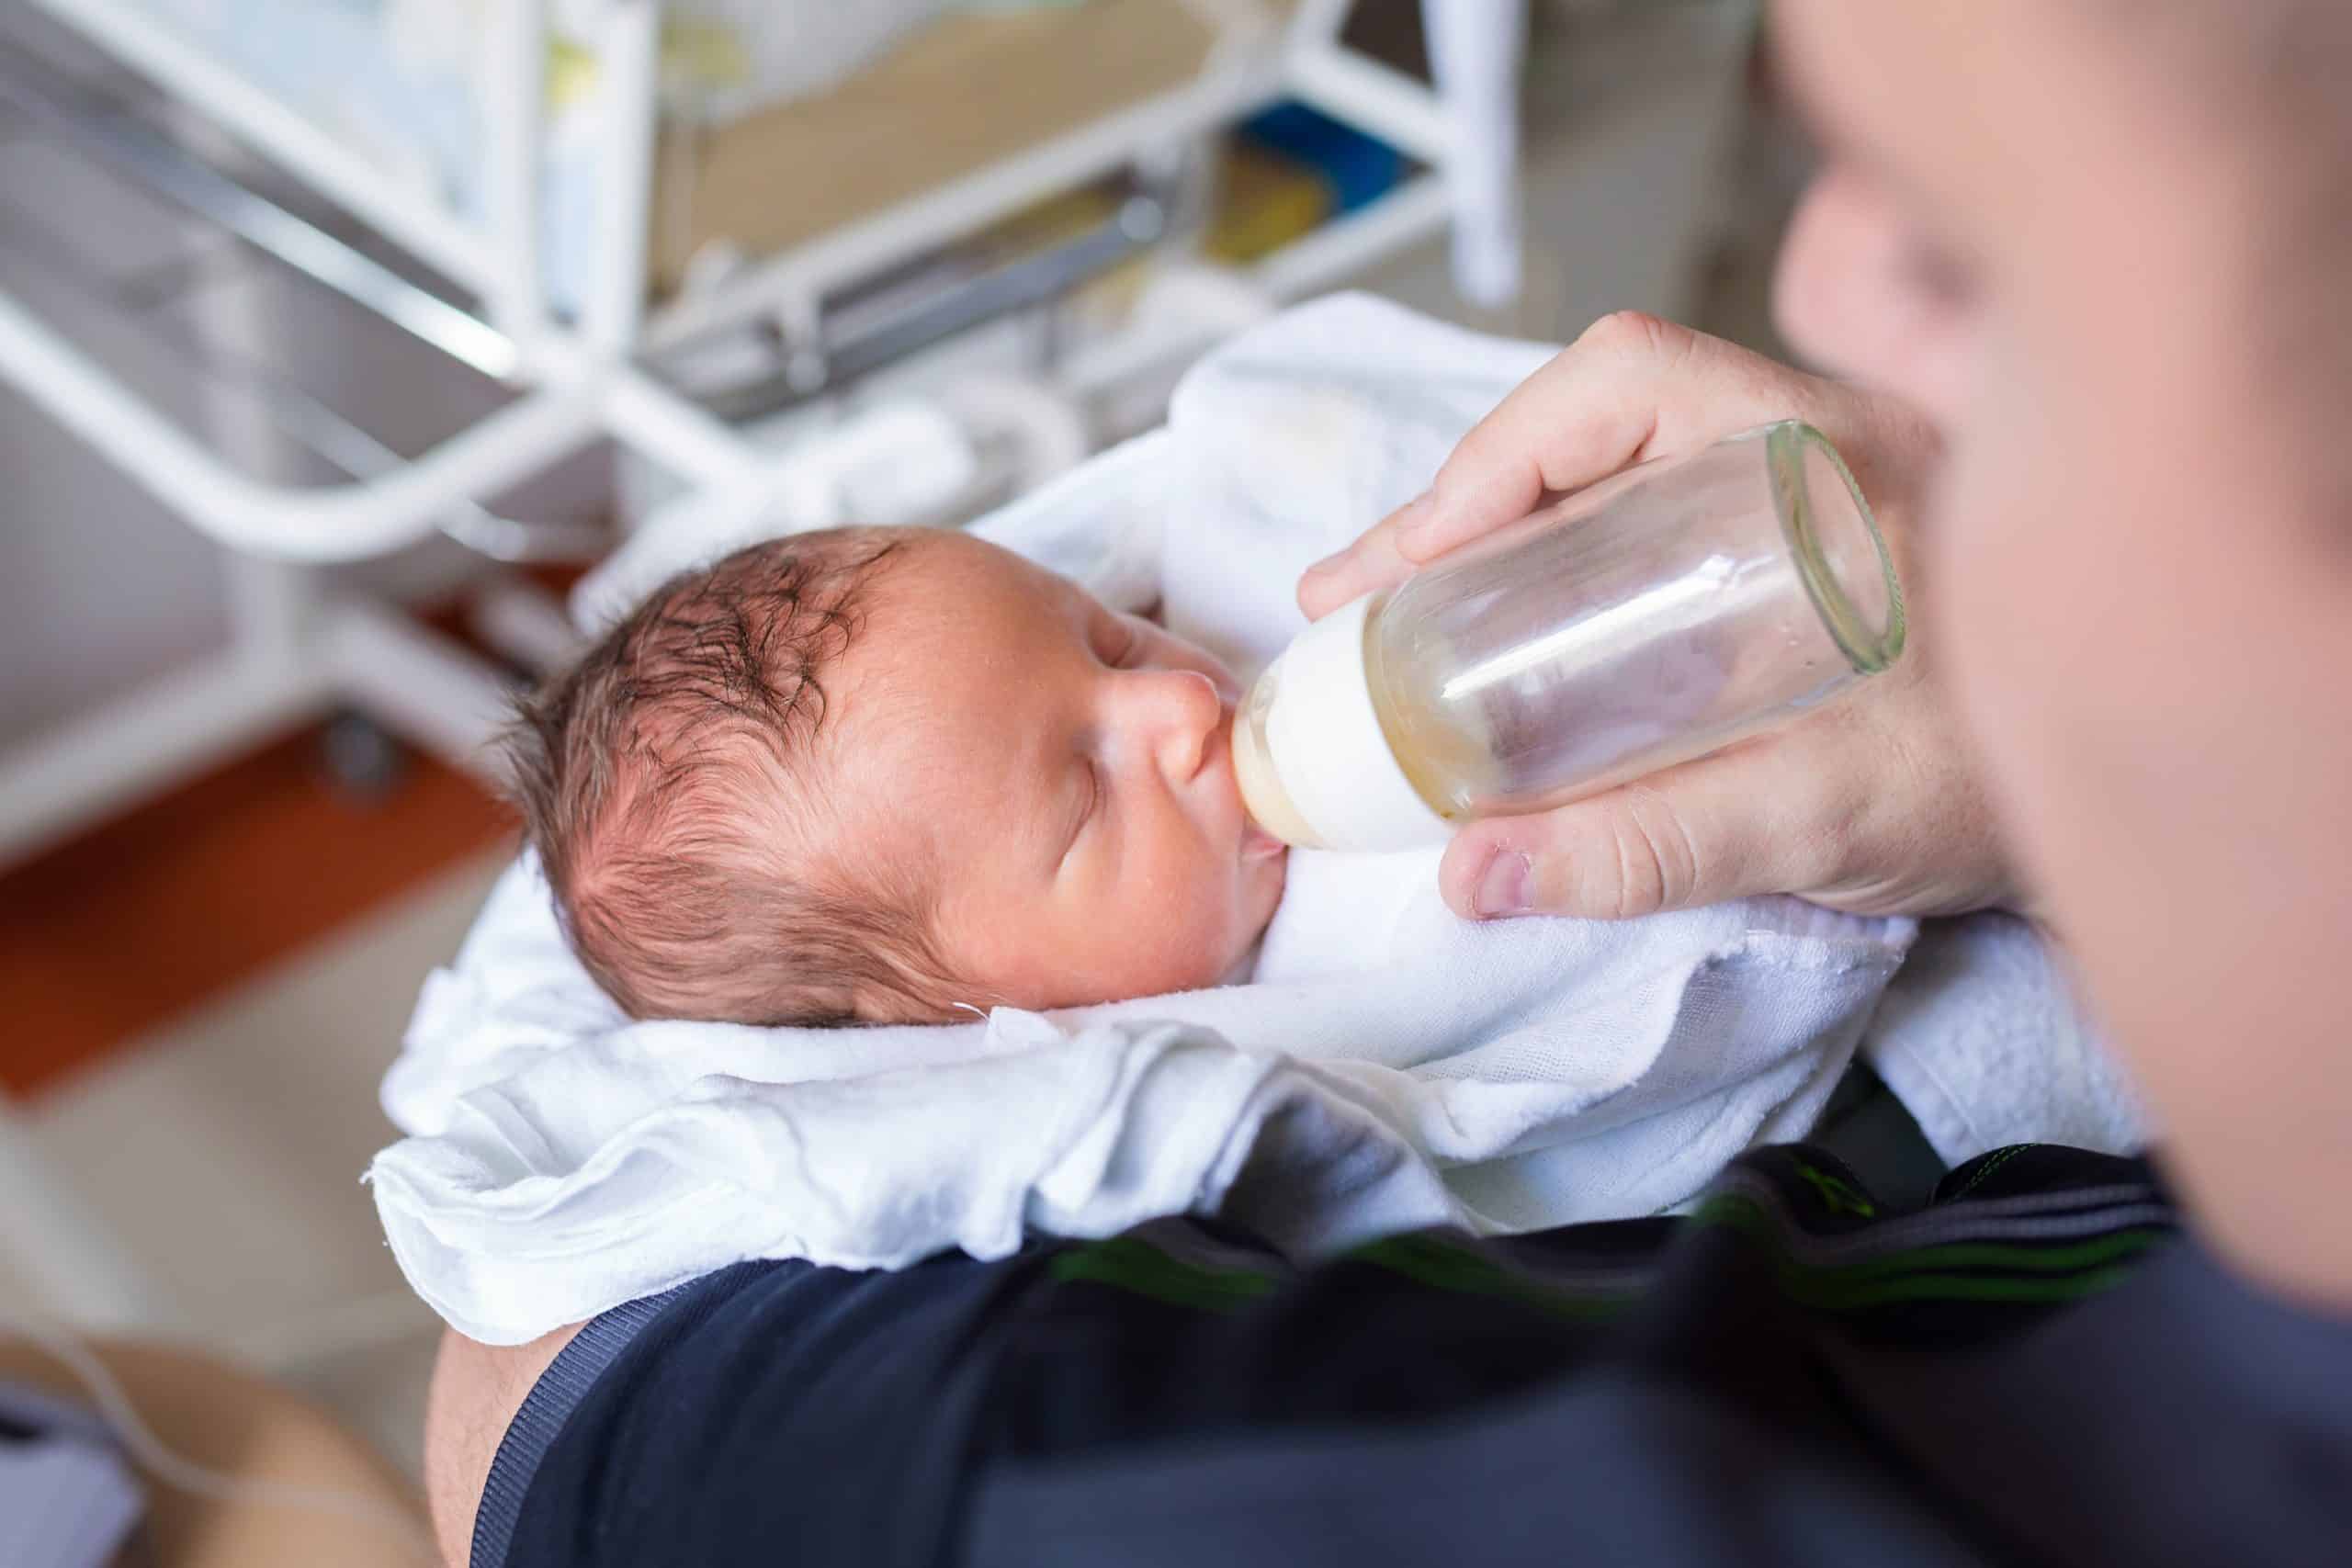 A parent feeds a baby a bottle in a hospital setting